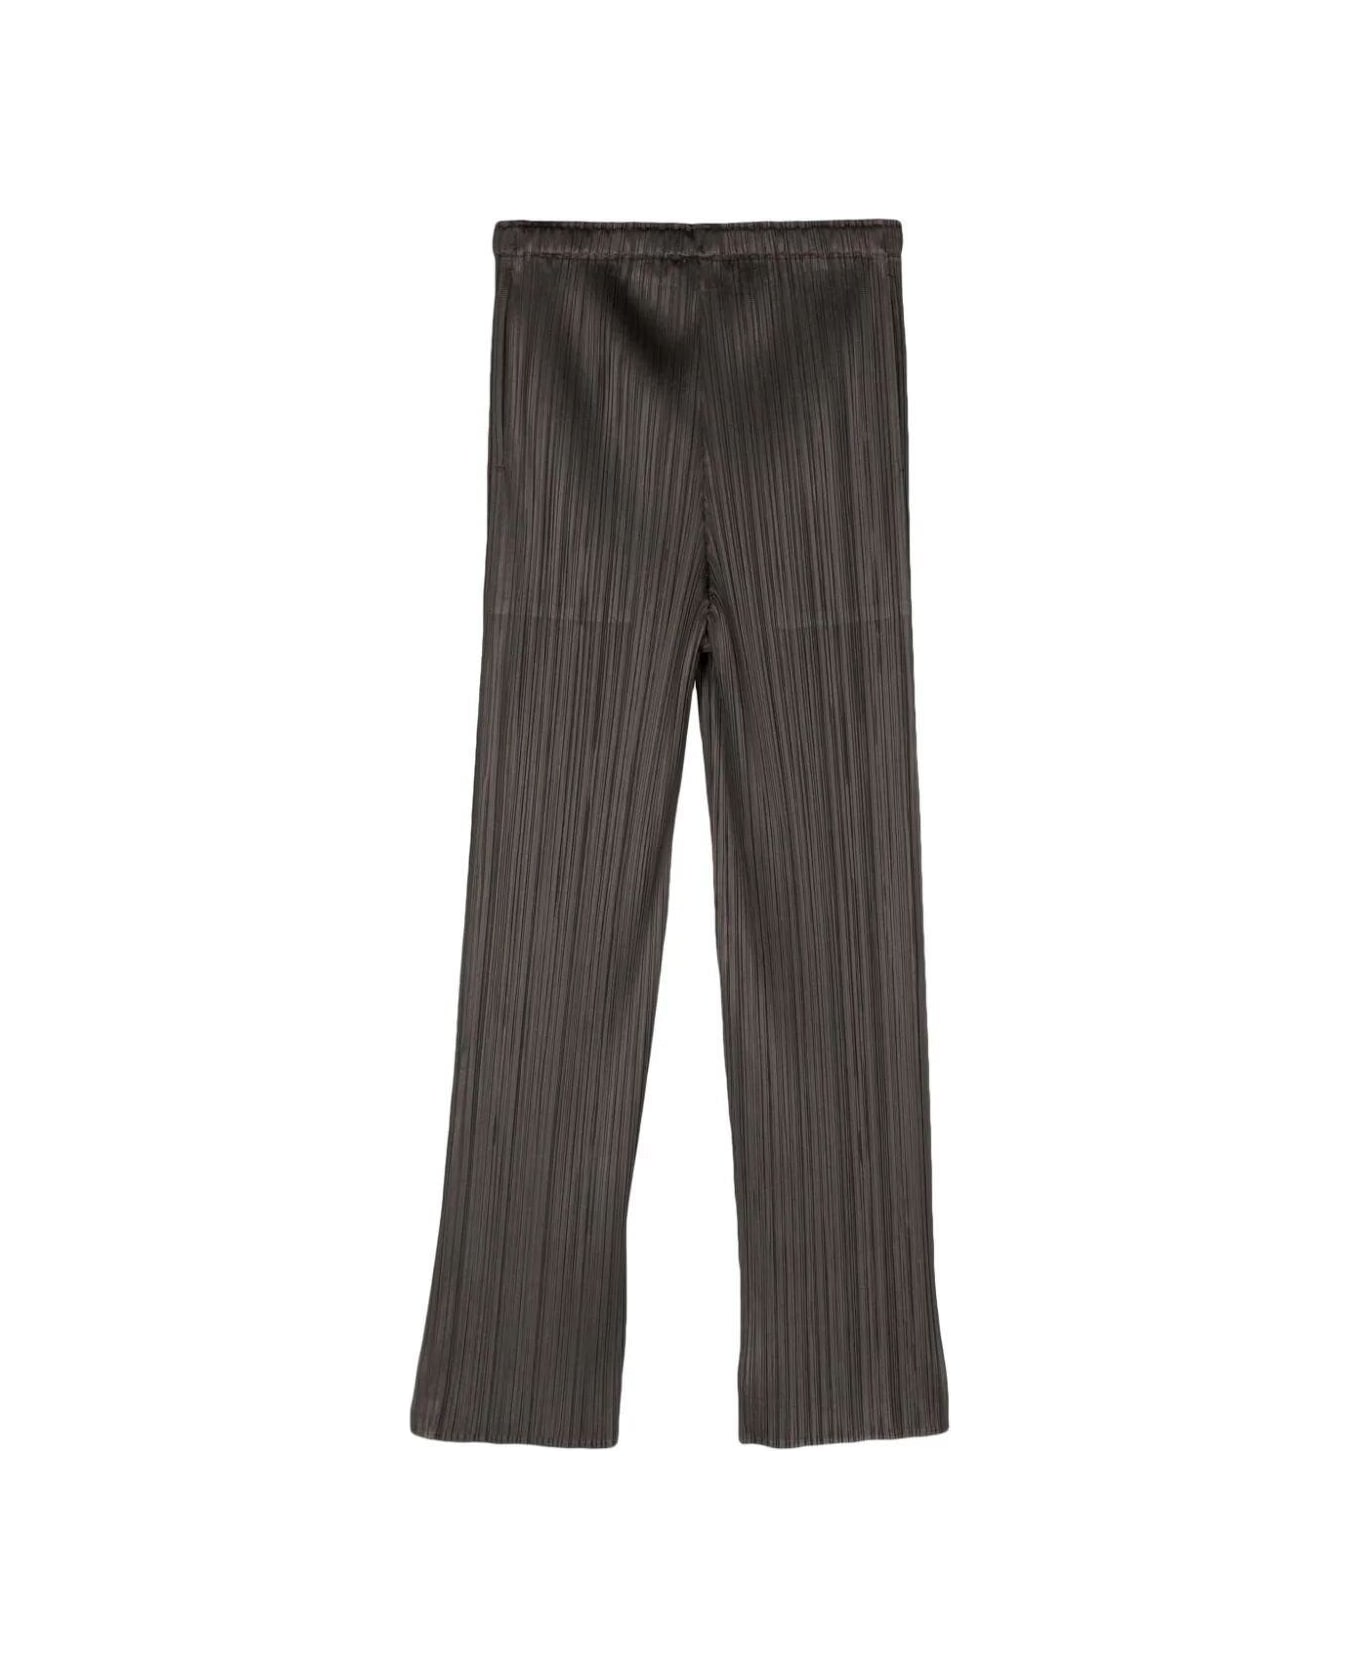 Pleats Please Issey Miyake January Pleated Cropped Trousers - Charcoal Gray